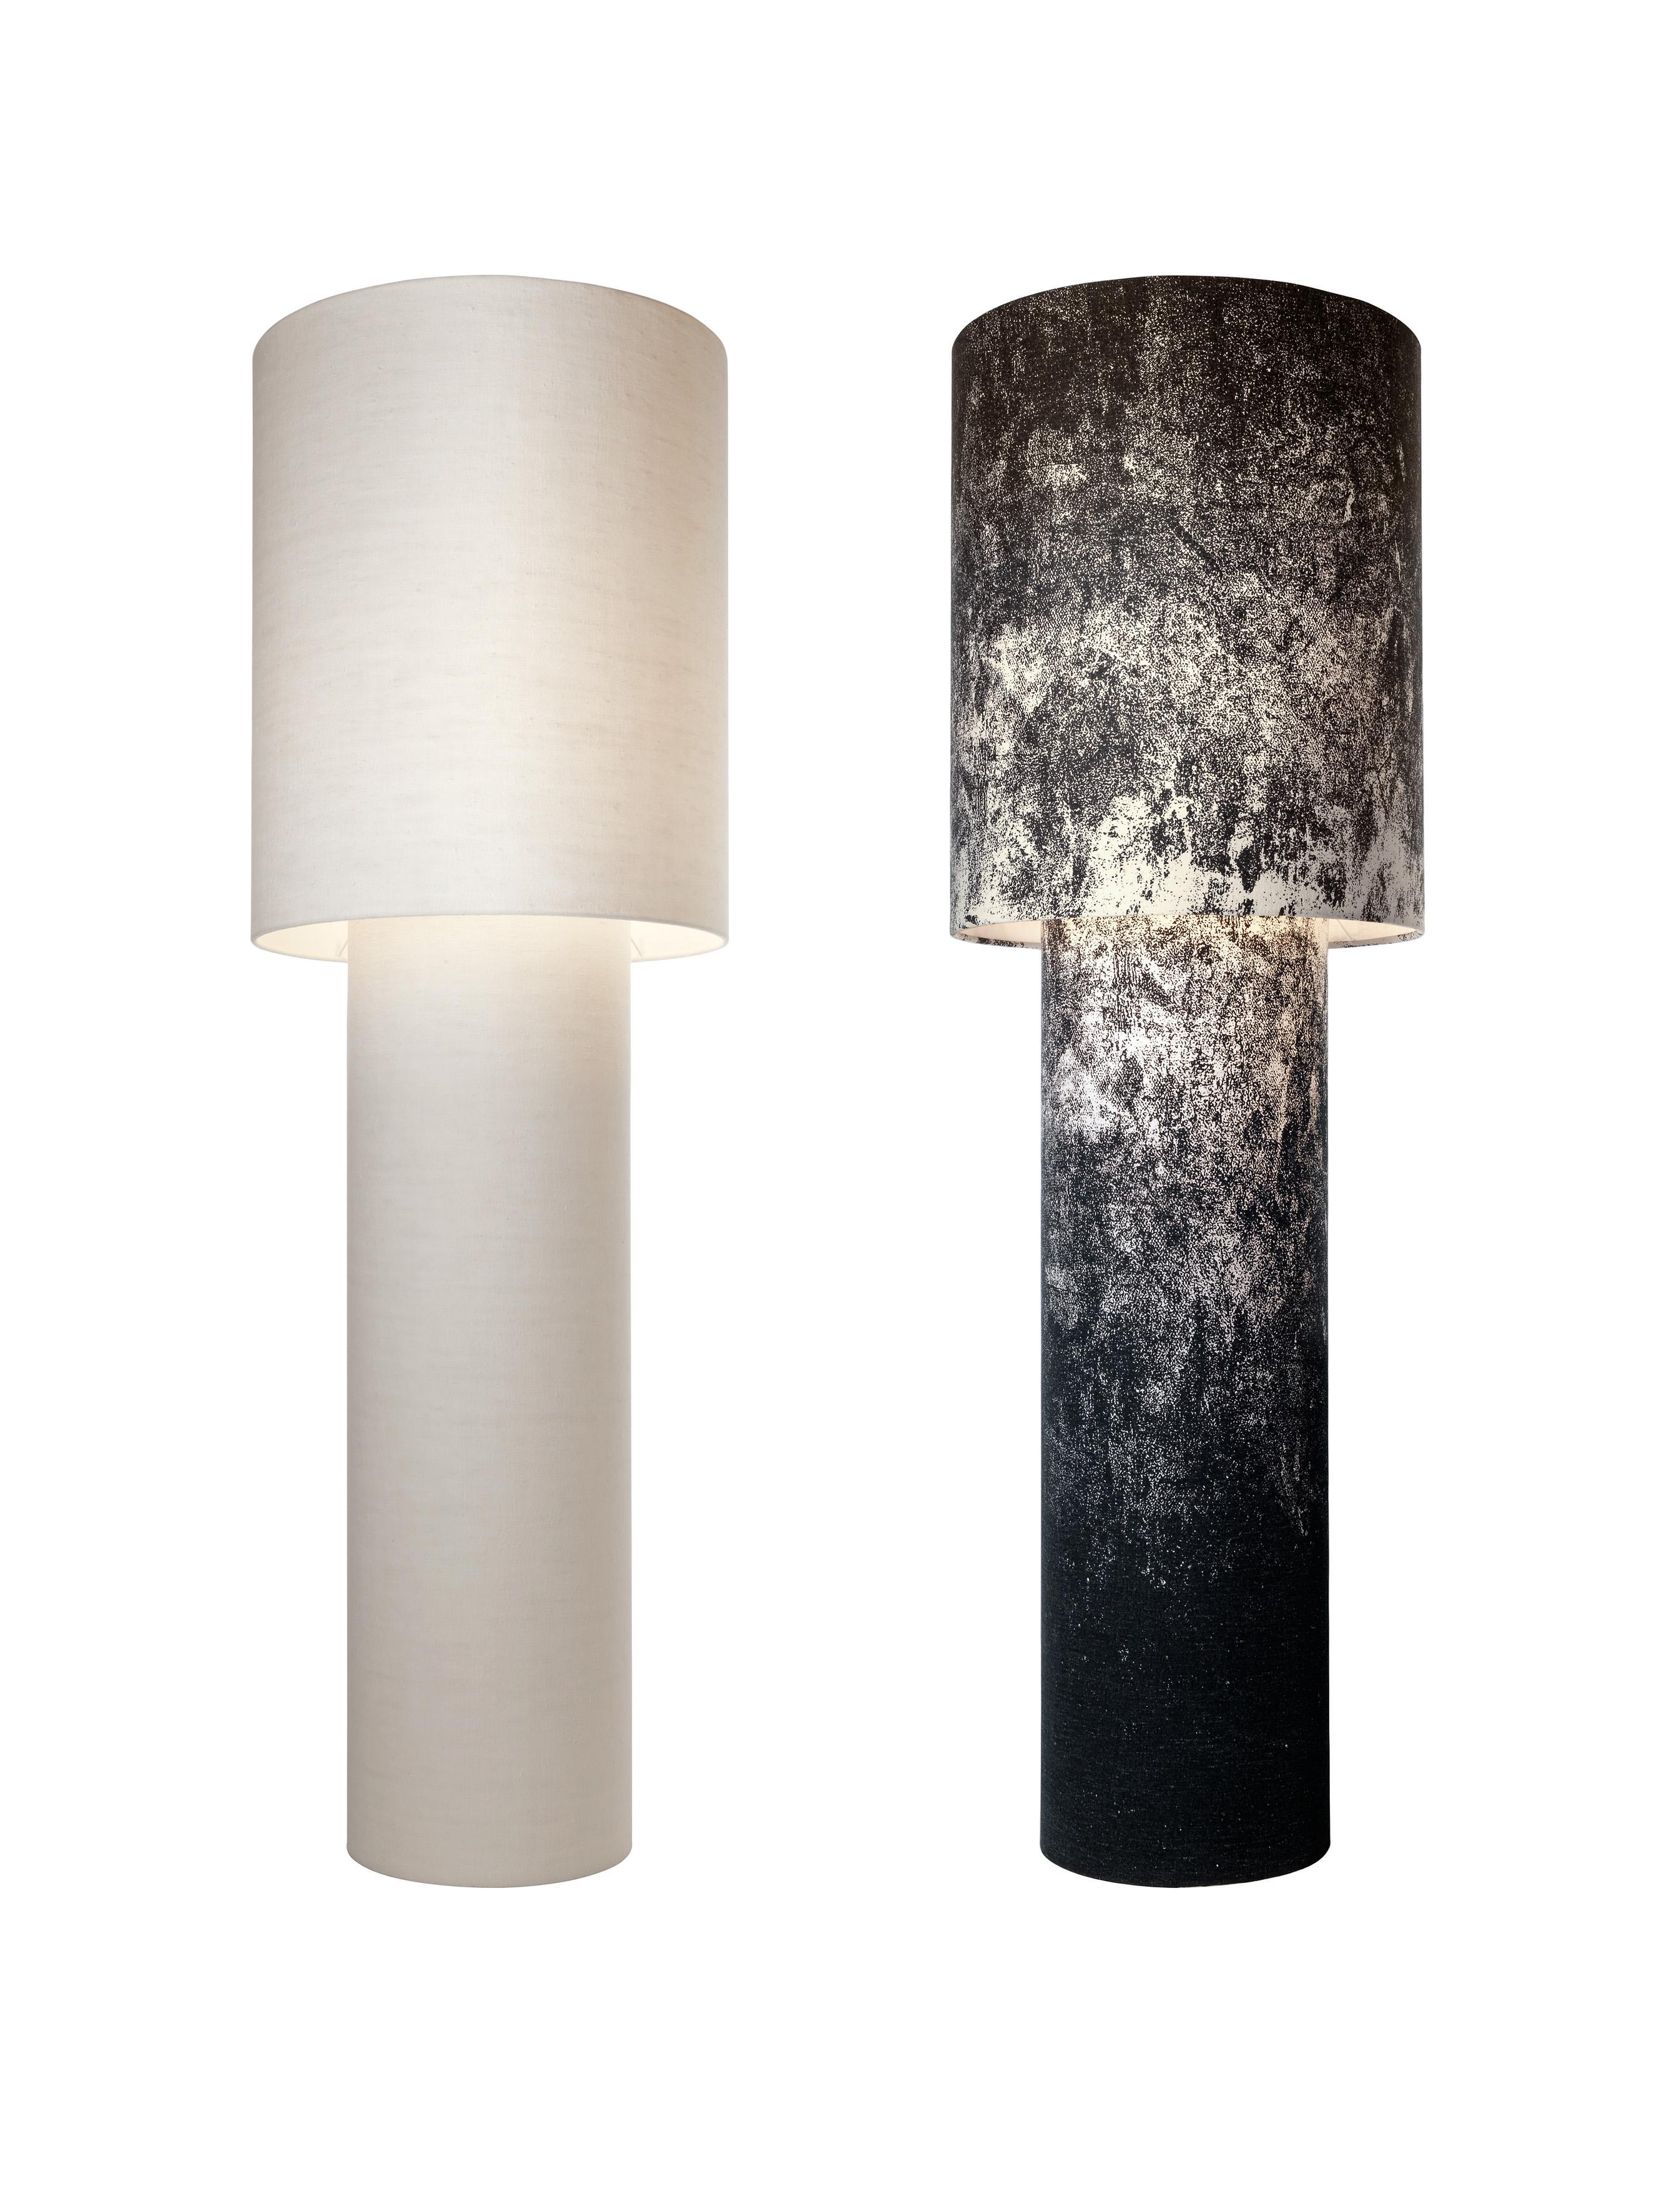 Luminous totems inspired by Industrial piping - hence the name - clad with casual-chic fabrics: a design IDEA that speaks the language of fashion according to Diesel. Pipe is a family of floor and table lamps, to be used Stand-alone or in multiple